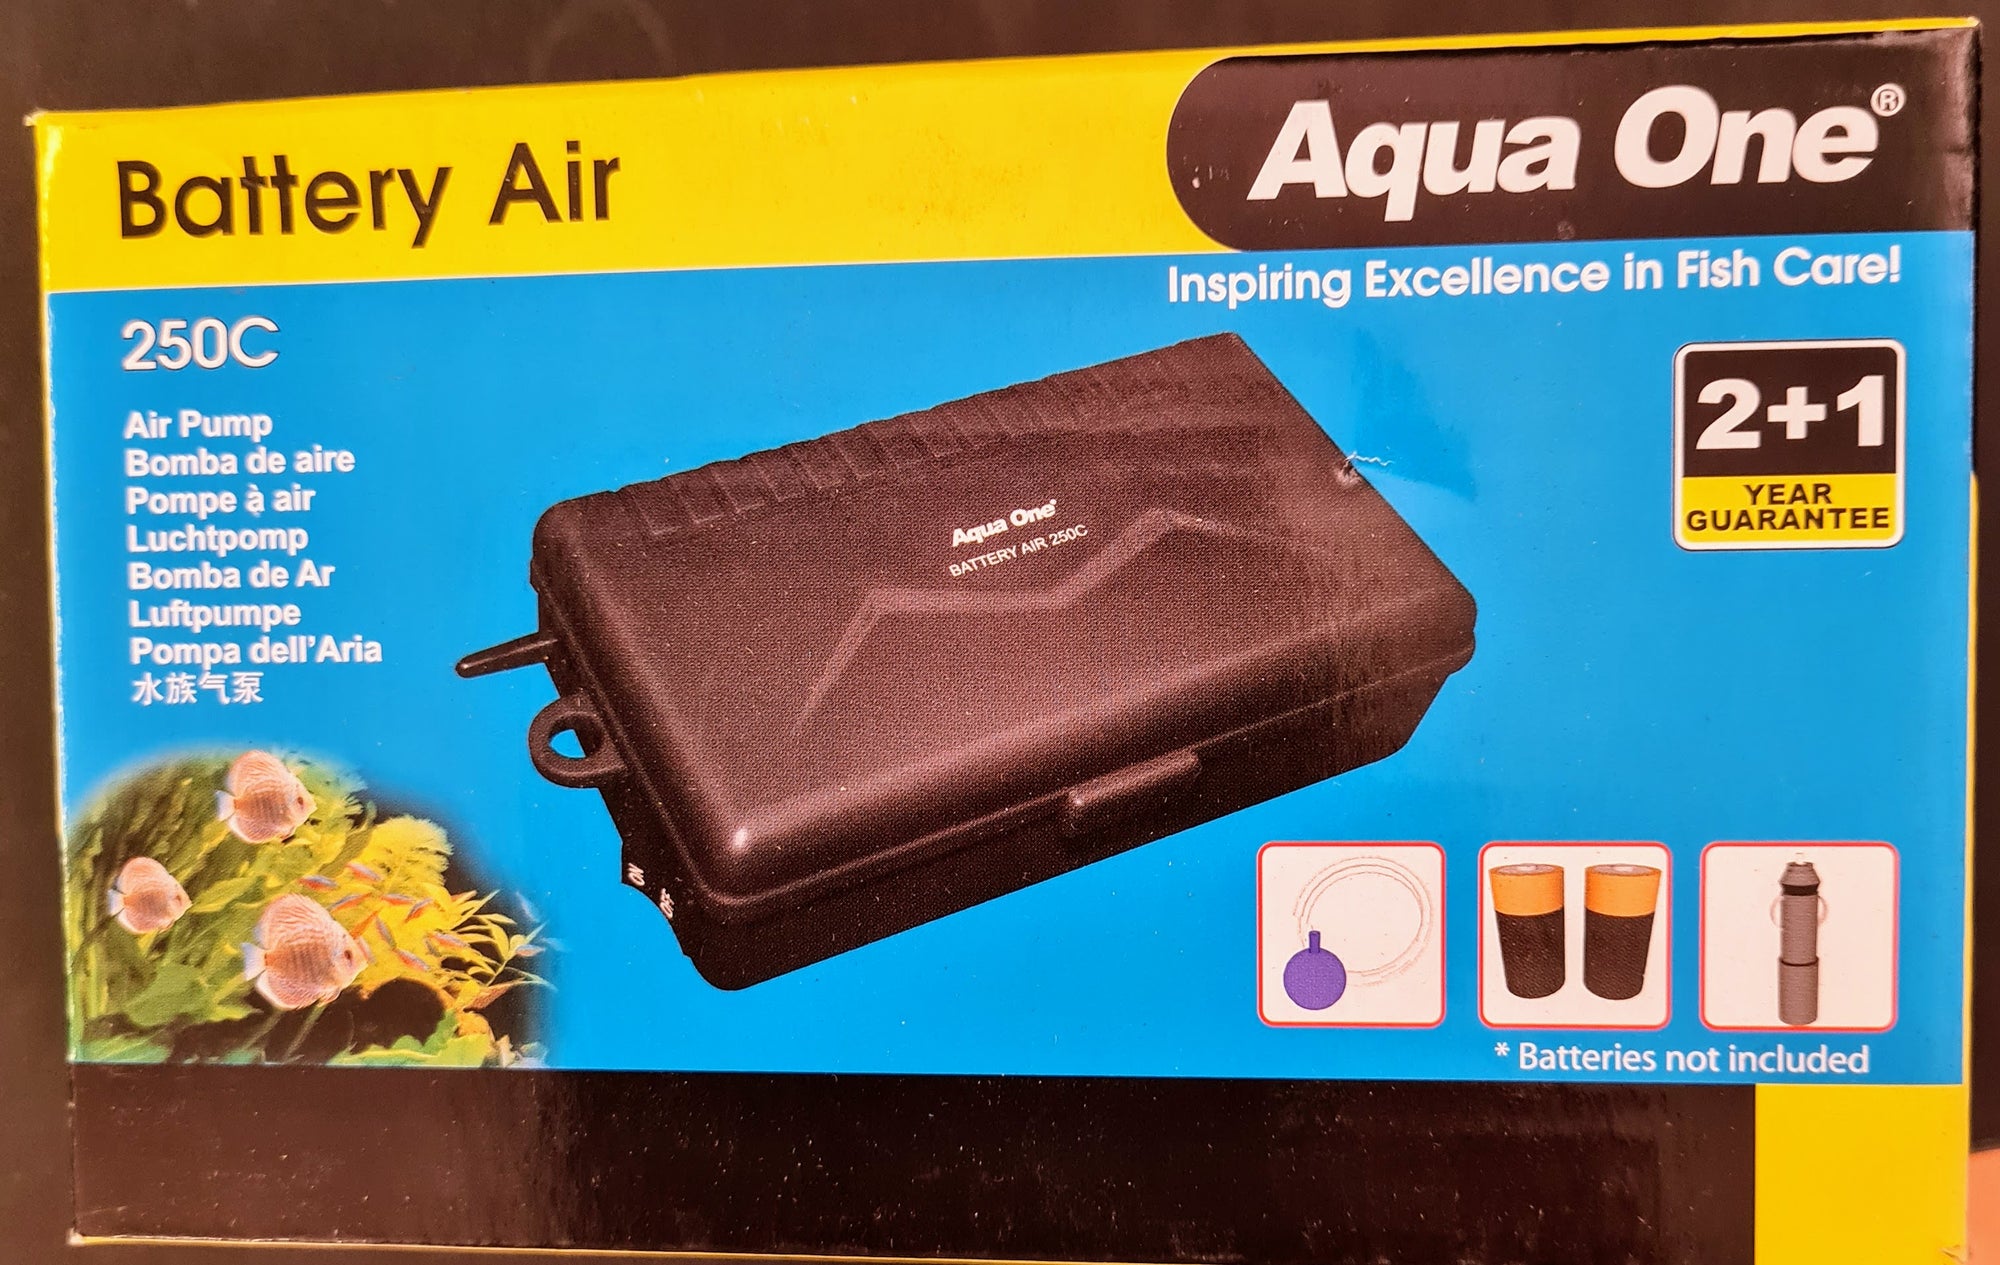 Aqua One Battery Air 250C - With Cigarette Lighter Power Supply